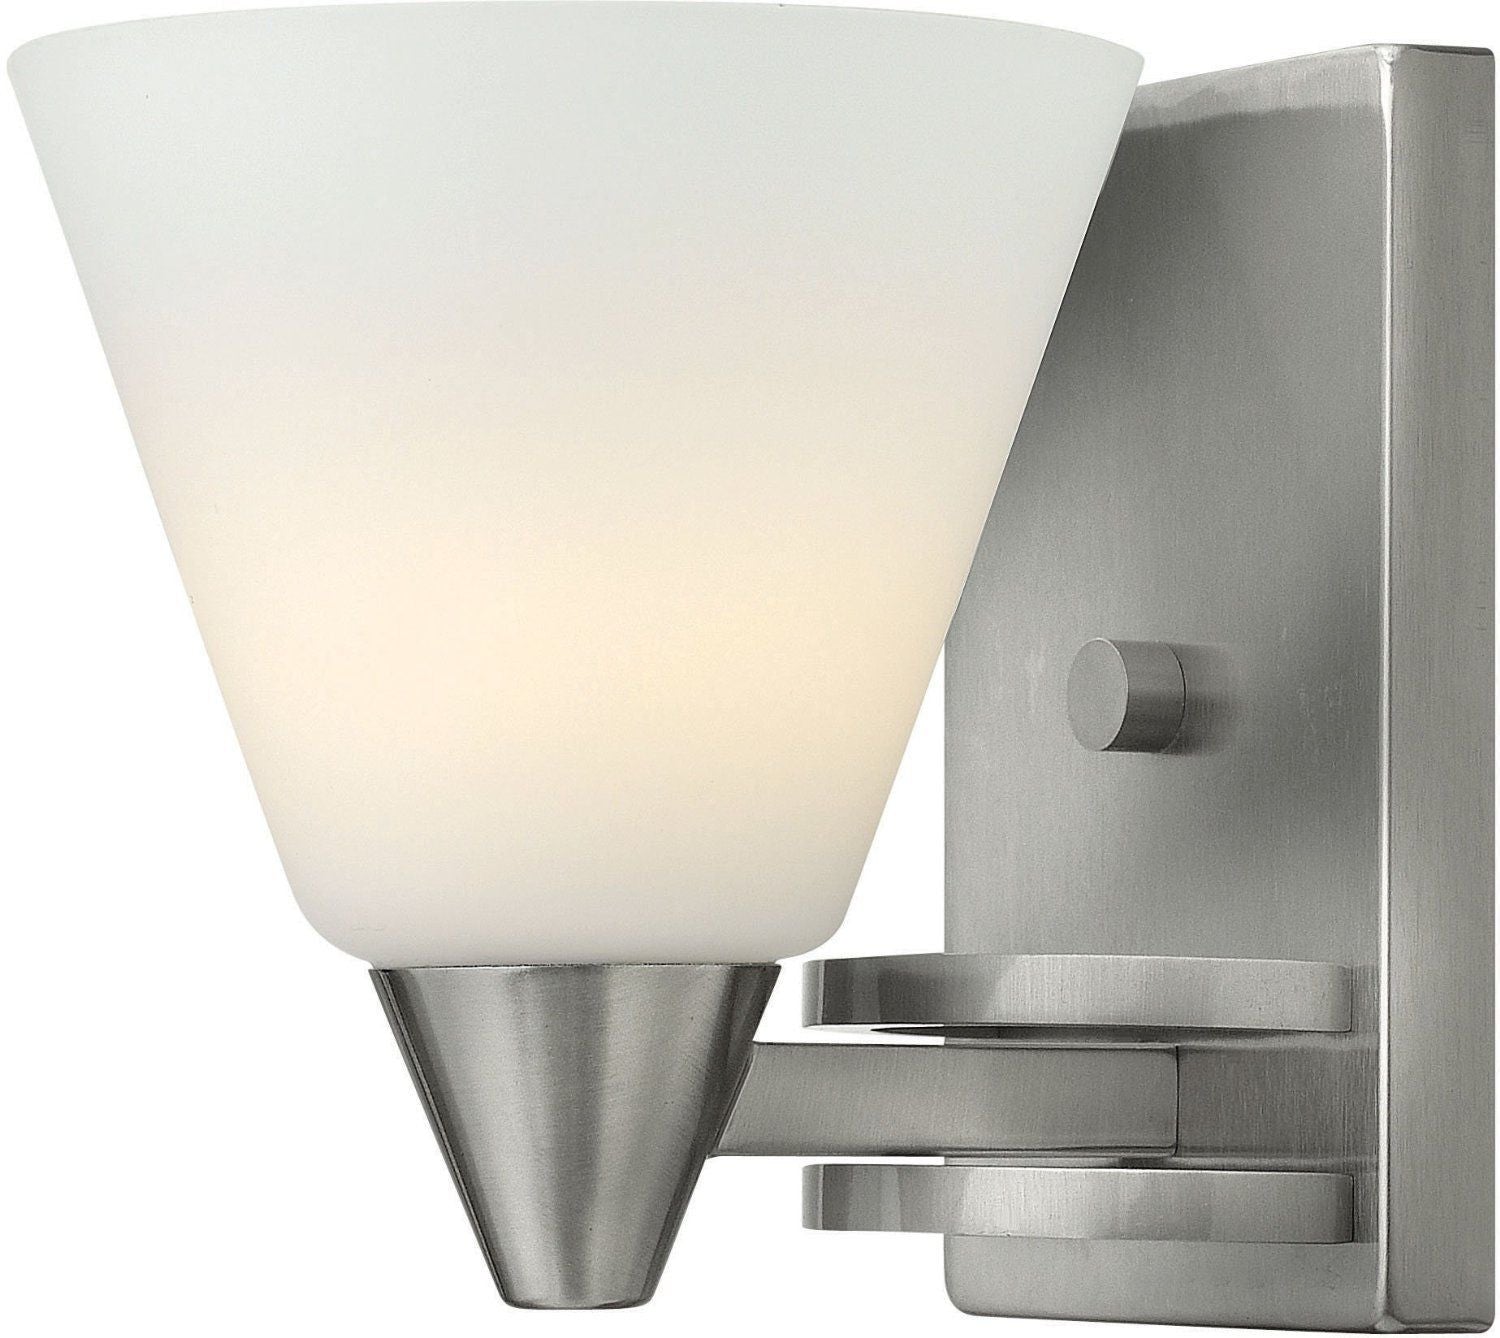 Hinkley Lighting 3660 BN Dillon Collection One Light Wall Sconce in Brushed Nickel Finish